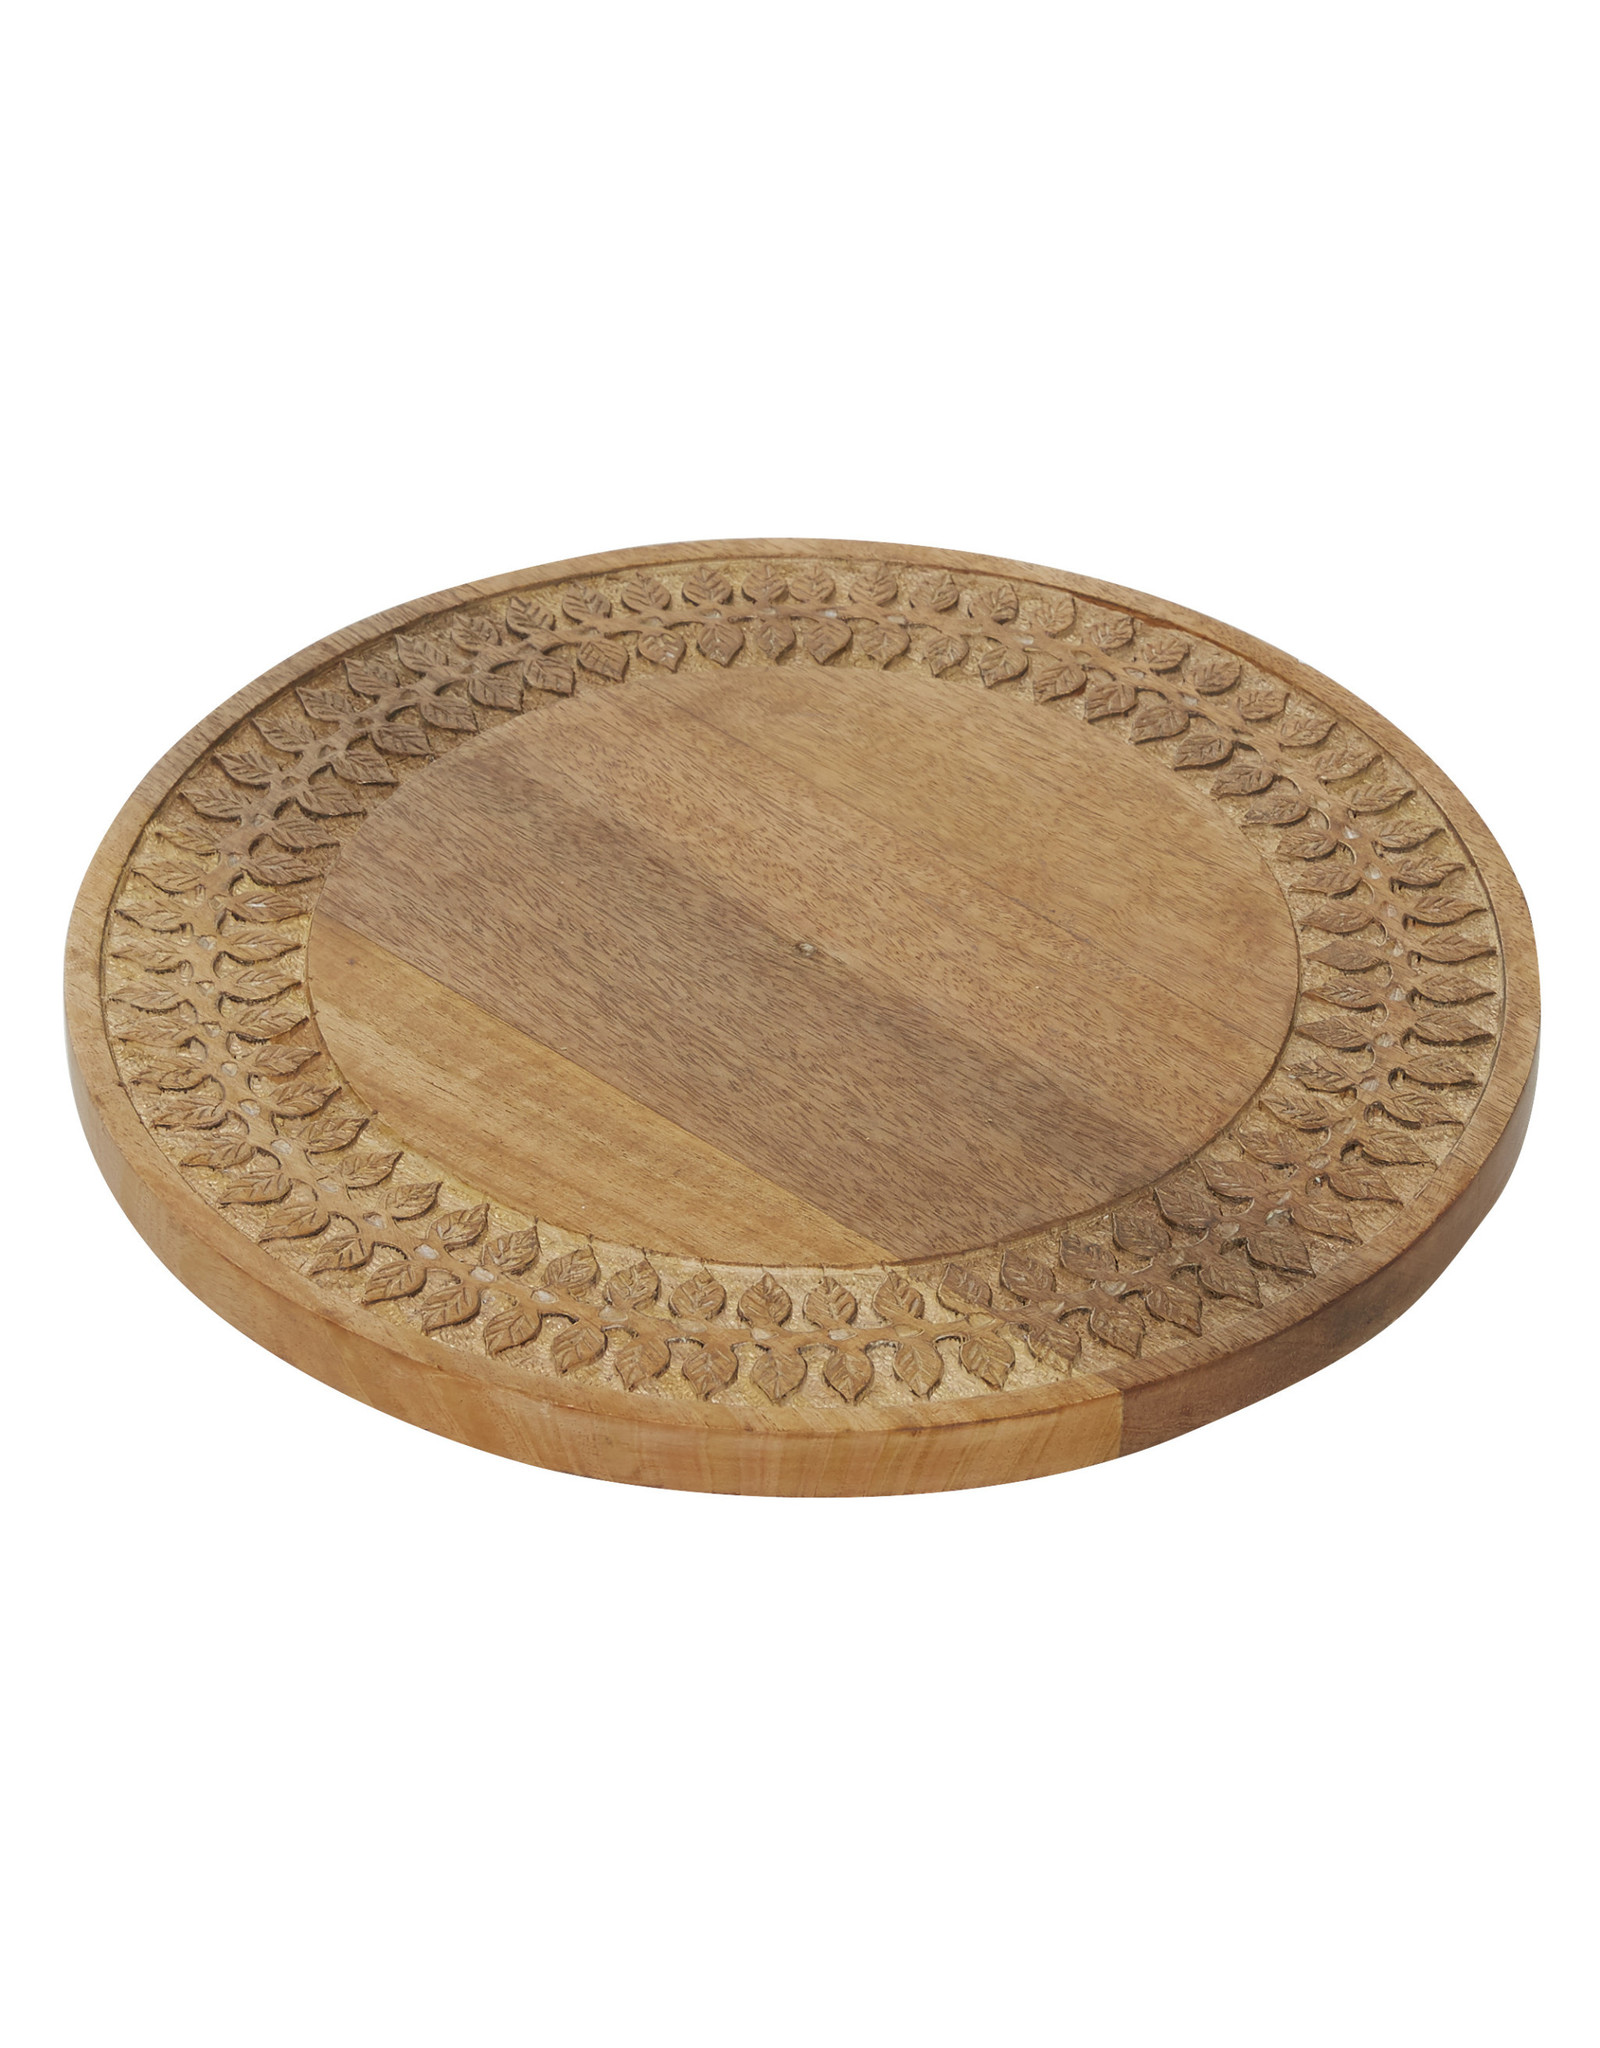 78281 Wd Lazy Susan Cake Stand 15"